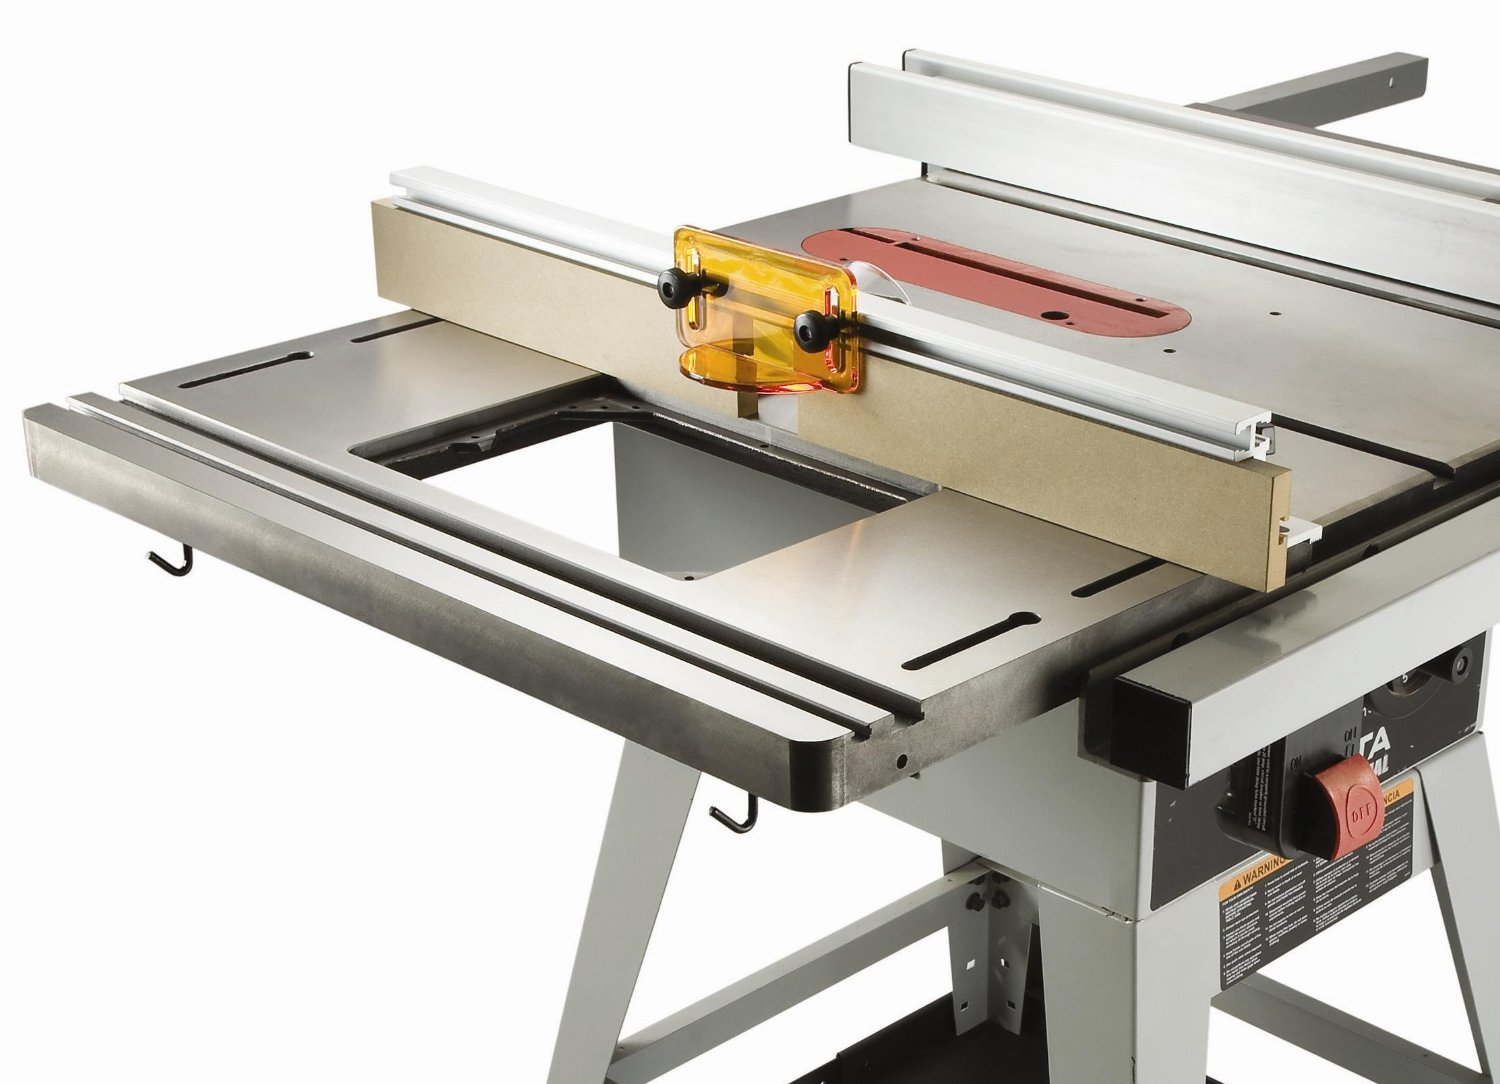 Bench Dog Pro Max 40-102 Router Table Review